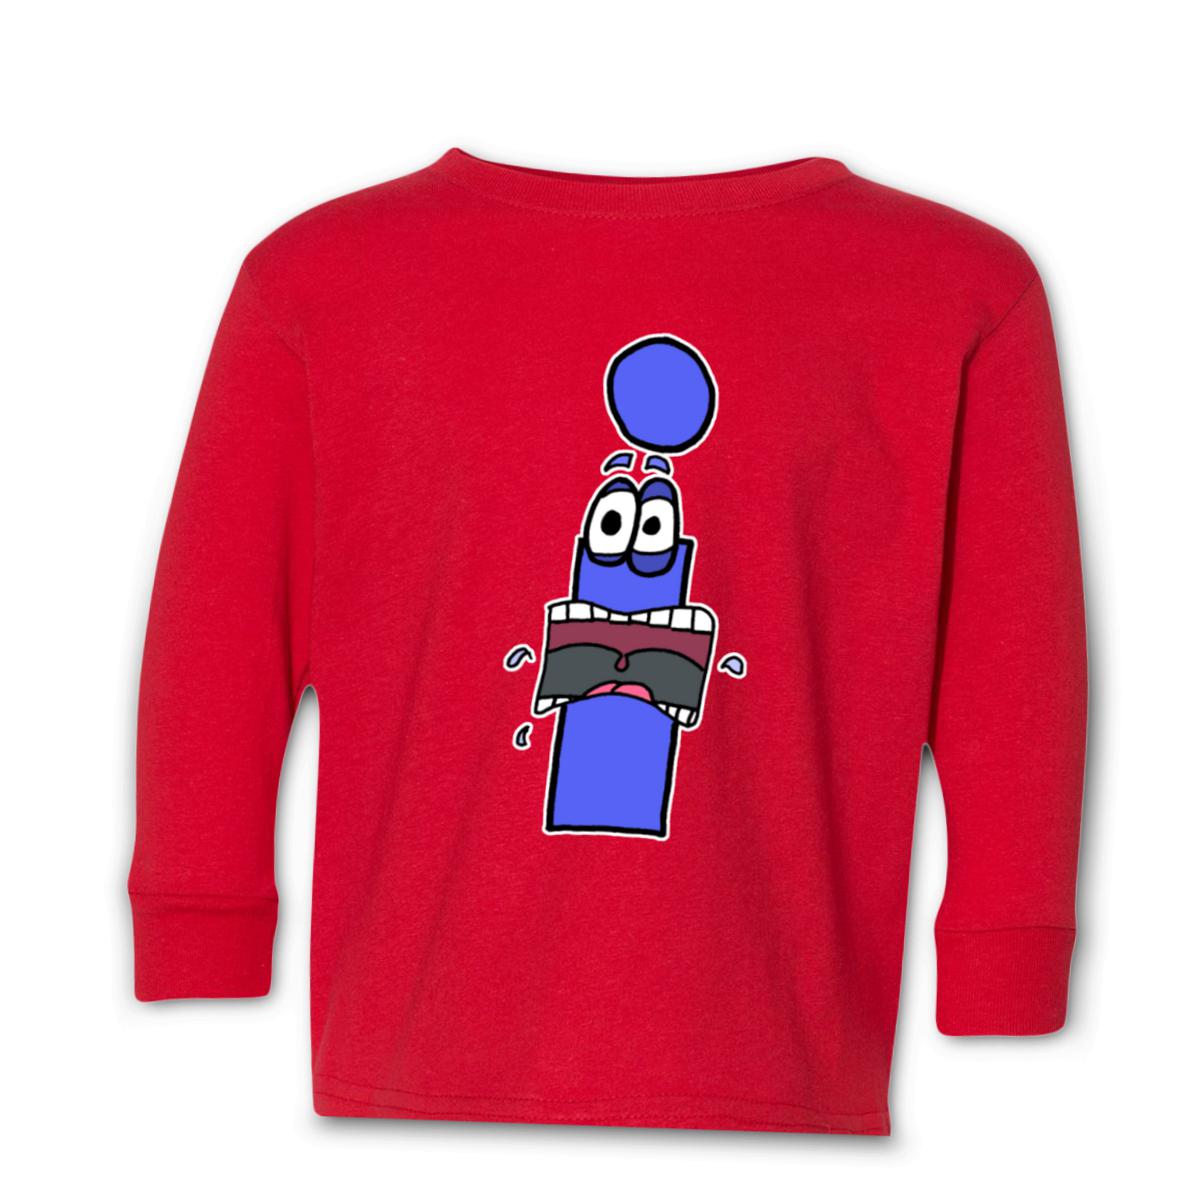 I Scream Toddler Long Sleeve Tee 2T red